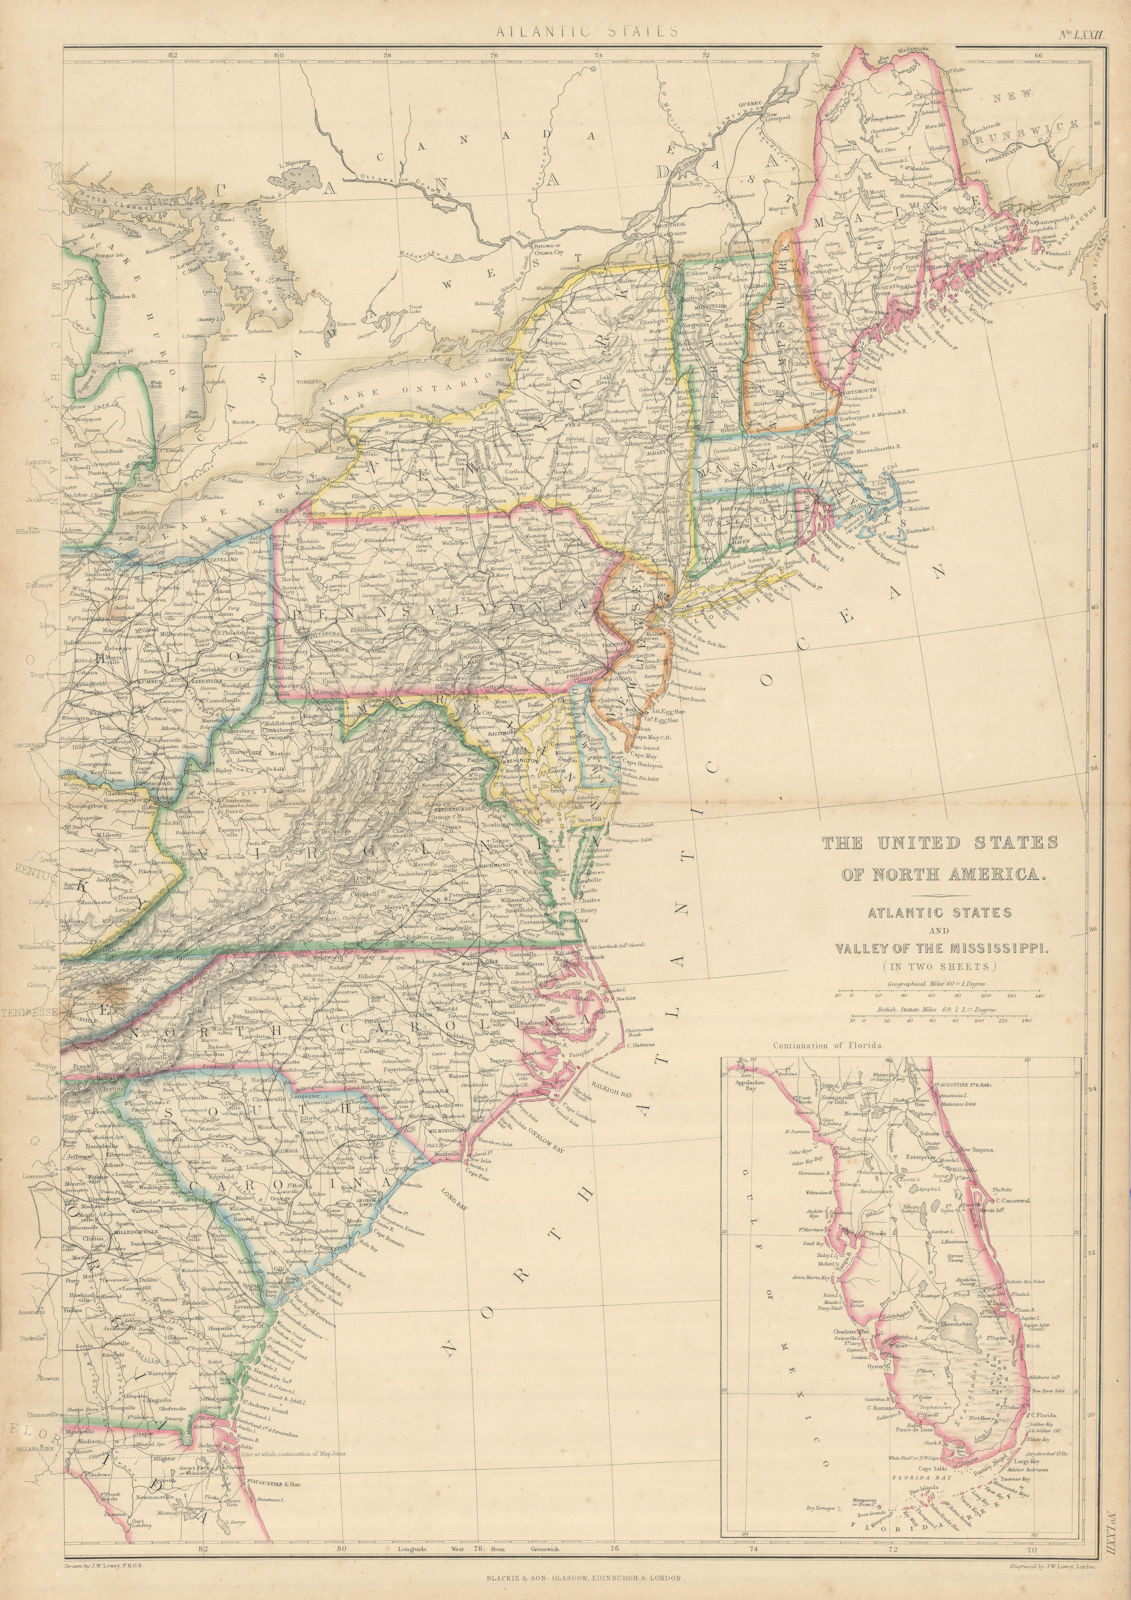 The United States of North America. USA Atlantic States. LOWRY 1860 old map